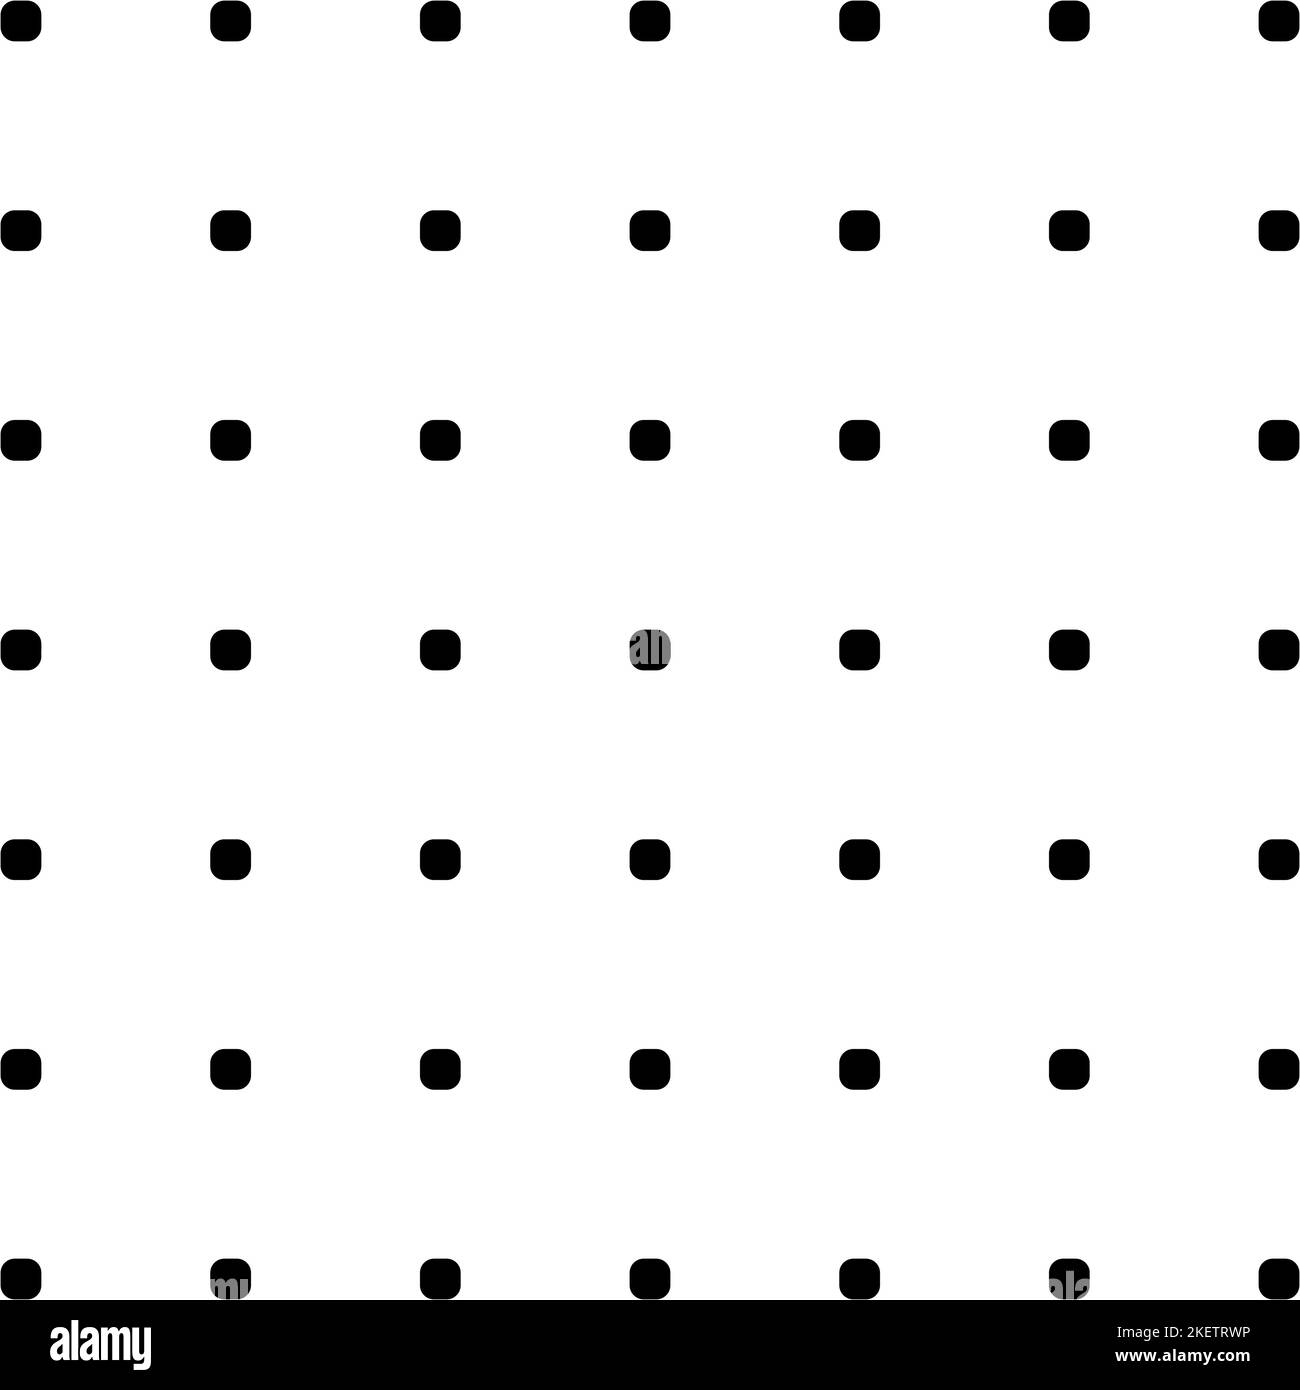 Ordered dot structure, seamless pattern, black on white vector Stock Vector